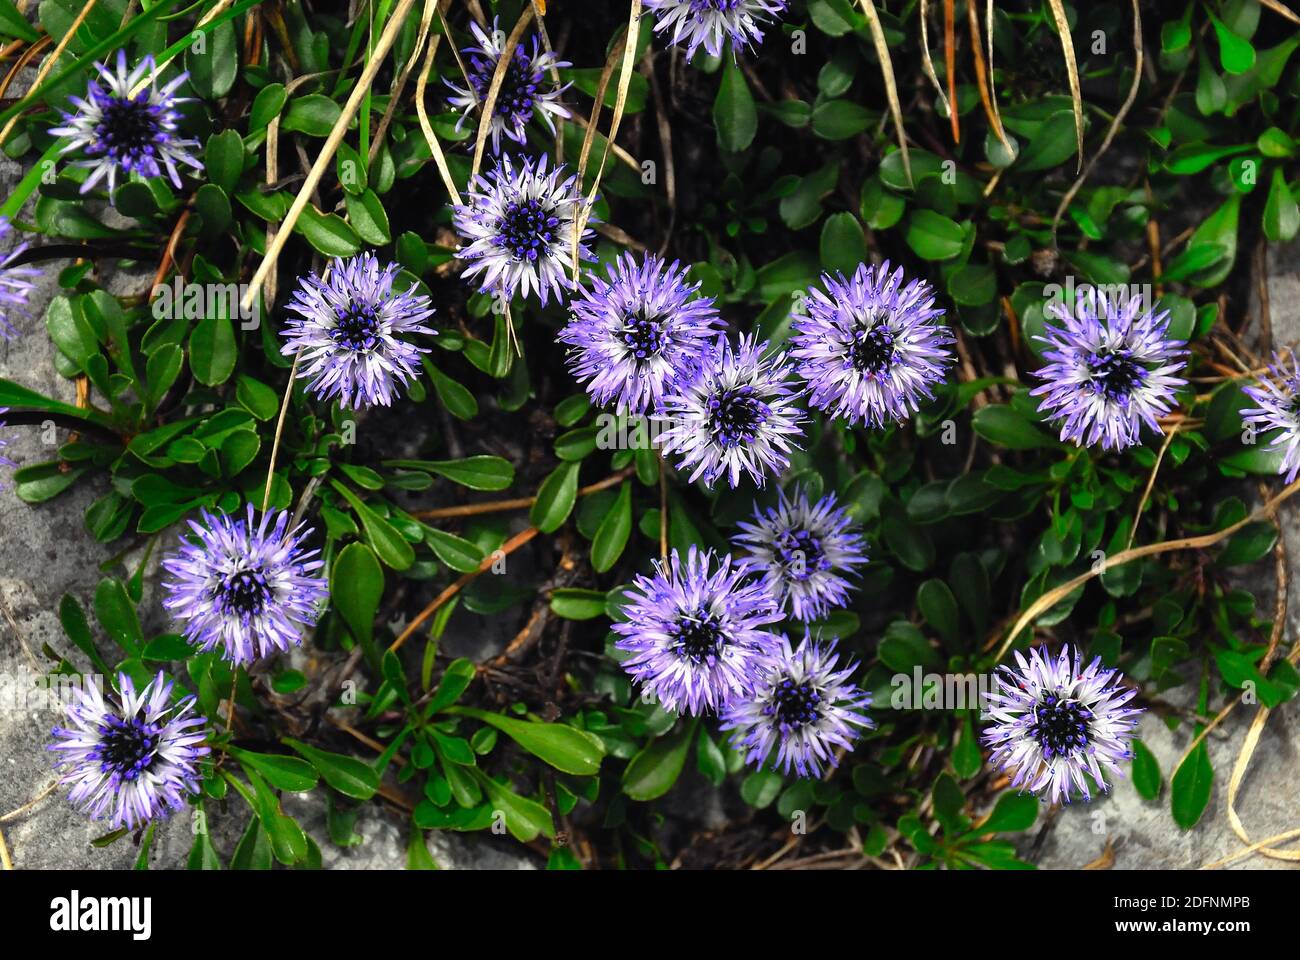 Carnic Apls, Volaia pass. during WWI it was the scene of bloody battles from Italian and Austro-Hungarian armies. Flowers of Globularia nudicaulis or Vedovella alpina. Stock Photo